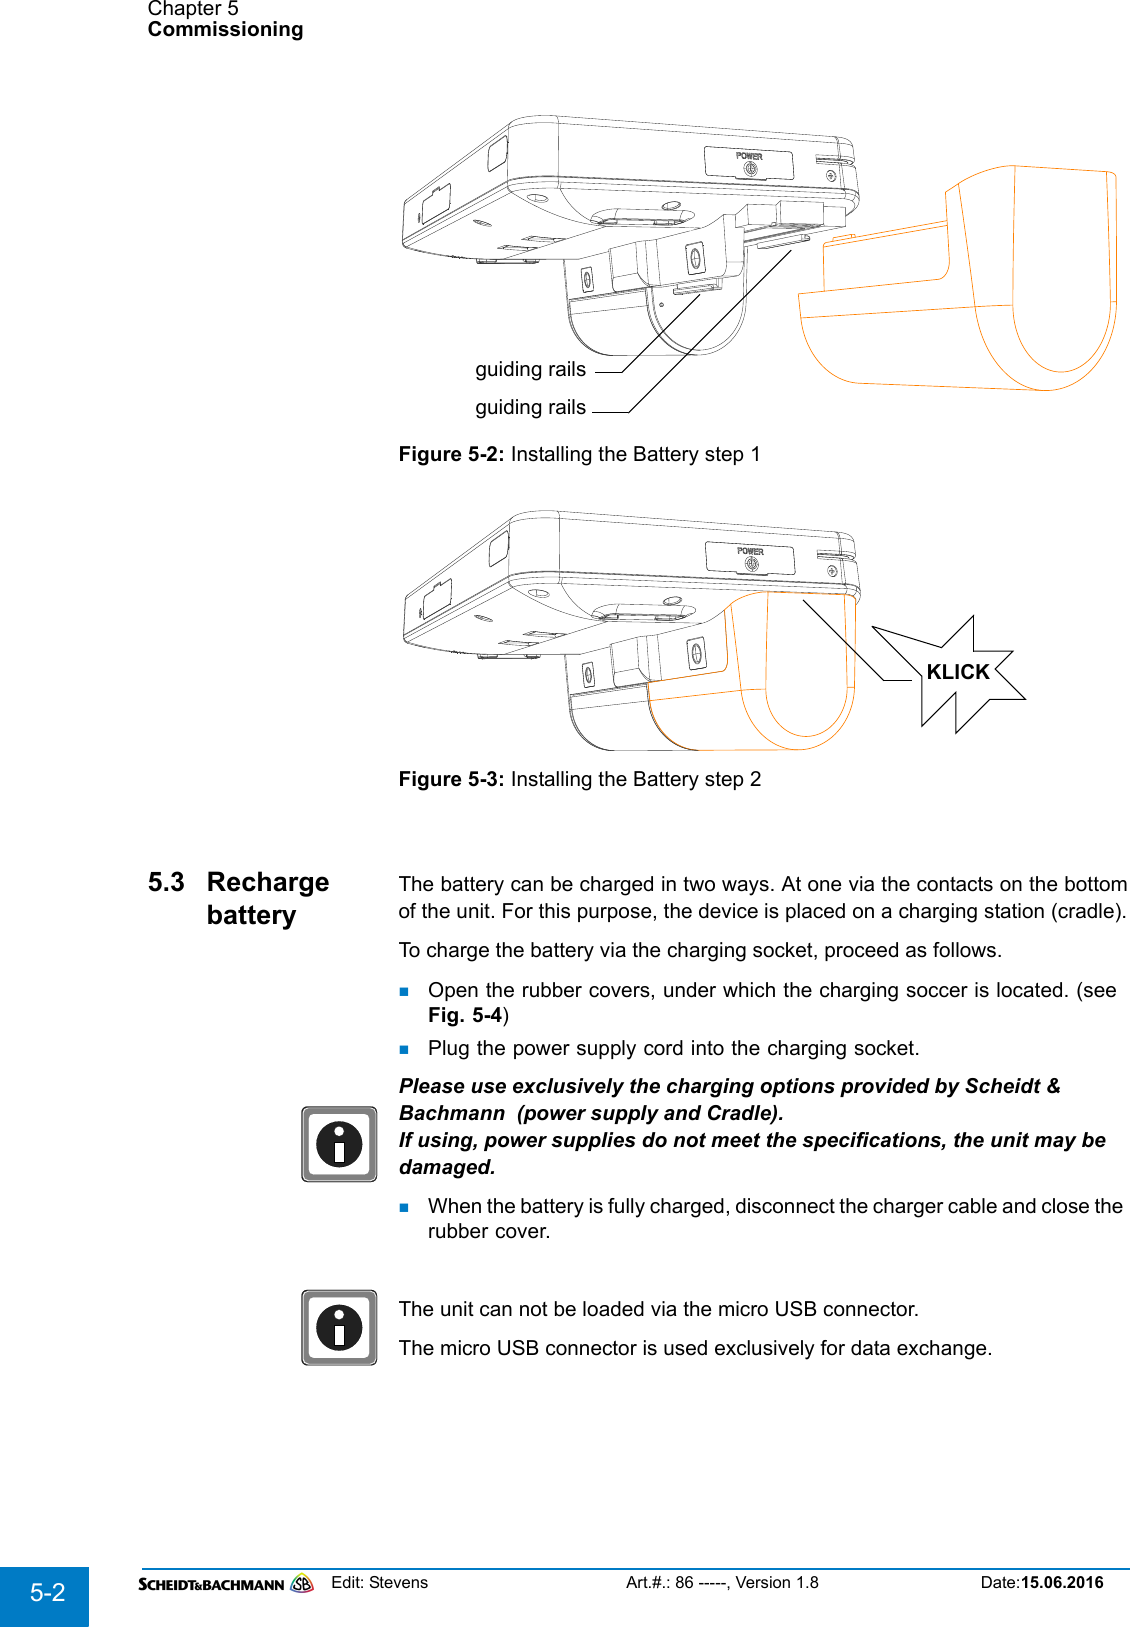 Chapter 5CommissioningEdit: Stevens Art.#.: 86 -----, Version 1.8 Date:15.06.20165-2Figure 5-2: Installing the Battery step 1Figure 5-3: Installing the Battery step 25.3 Recharge batteryThe battery can be charged in two ways. At one via the contacts on the bottomof the unit. For this purpose, the device is placed on a charging station (cradle).To charge the battery via the charging socket, proceed as follows.Open the rubber covers, under which the charging soccer is located. (see Fig. 5-4)Plug the power supply cord into the charging socket.Please use exclusively the charging options provided by Scheidt &amp; Bachmann  (power supply and Cradle).If using, power supplies do not meet the specifications, the unit may be damaged.When the battery is fully charged, disconnect the charger cable and close the rubber cover.The unit can not be loaded via the micro USB connector.The micro USB connector is used exclusively for data exchange.guiding railsguiding railsKLICK